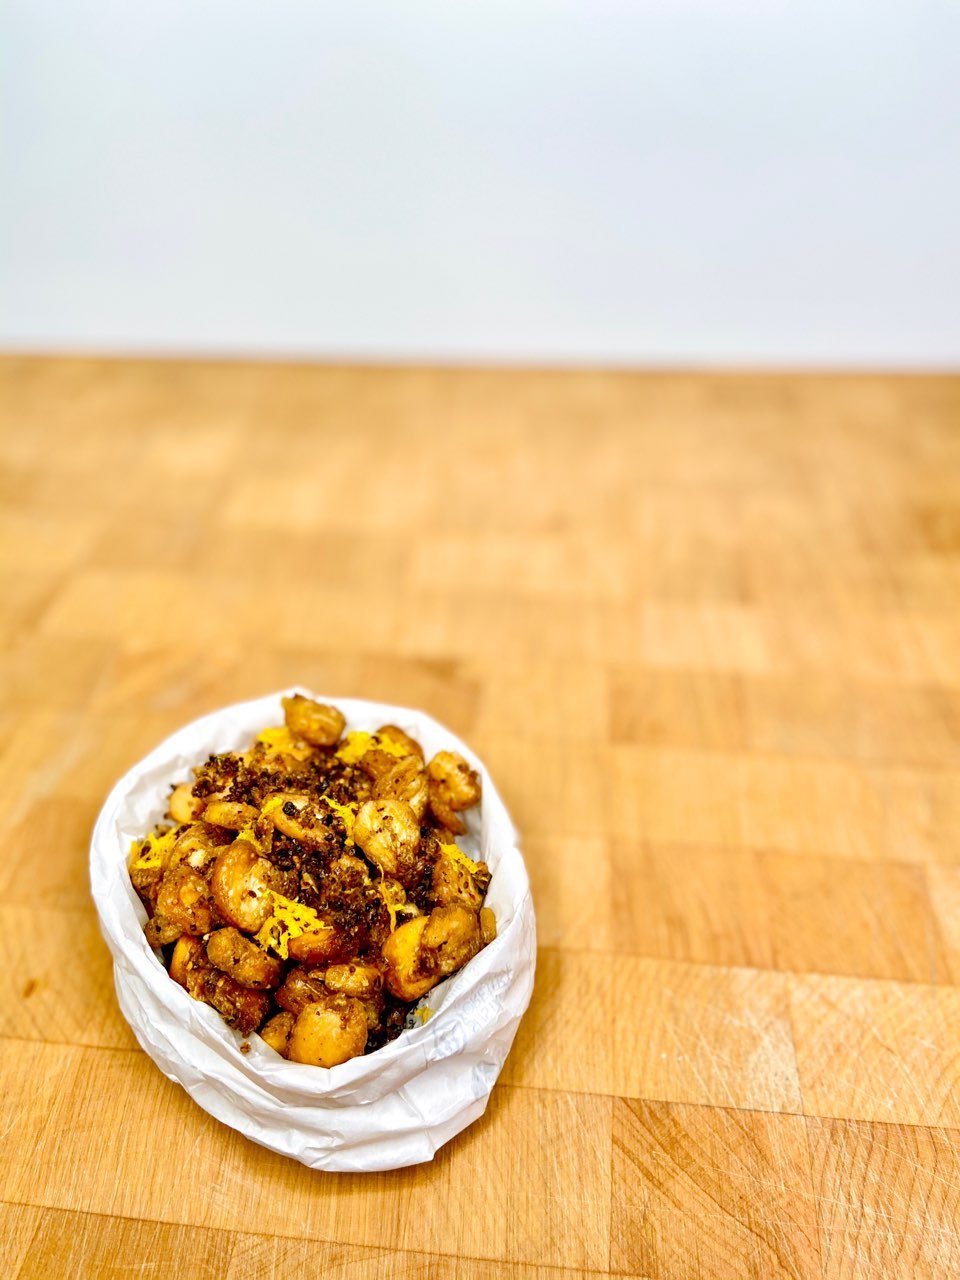 The menu features street food snacks like these corn nuts with worm salt. Photo courtesy of Gonzo.